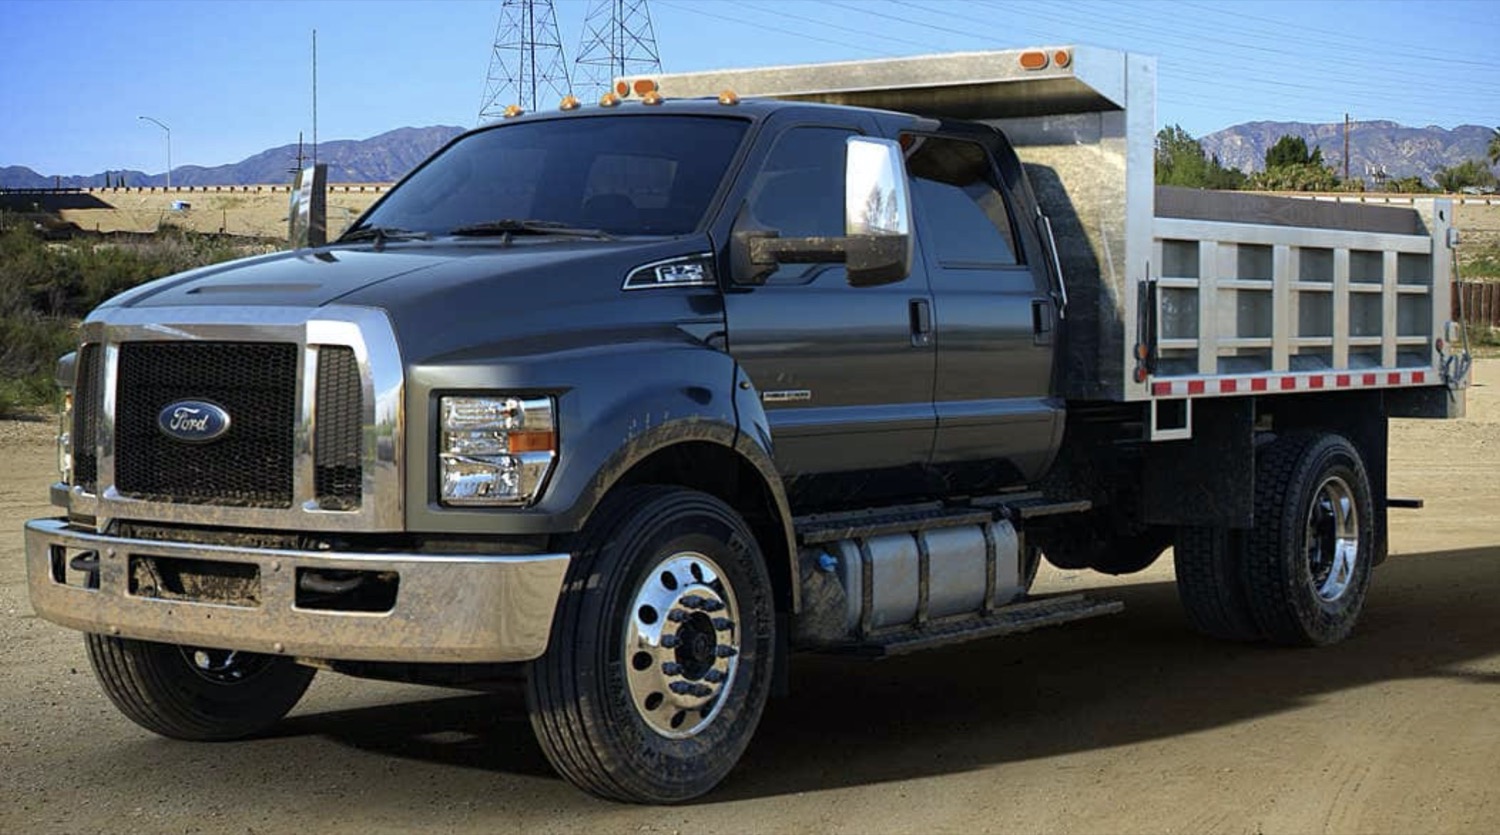 2021 Ford F-650, F-750 Get New Magnetic Color: First Look